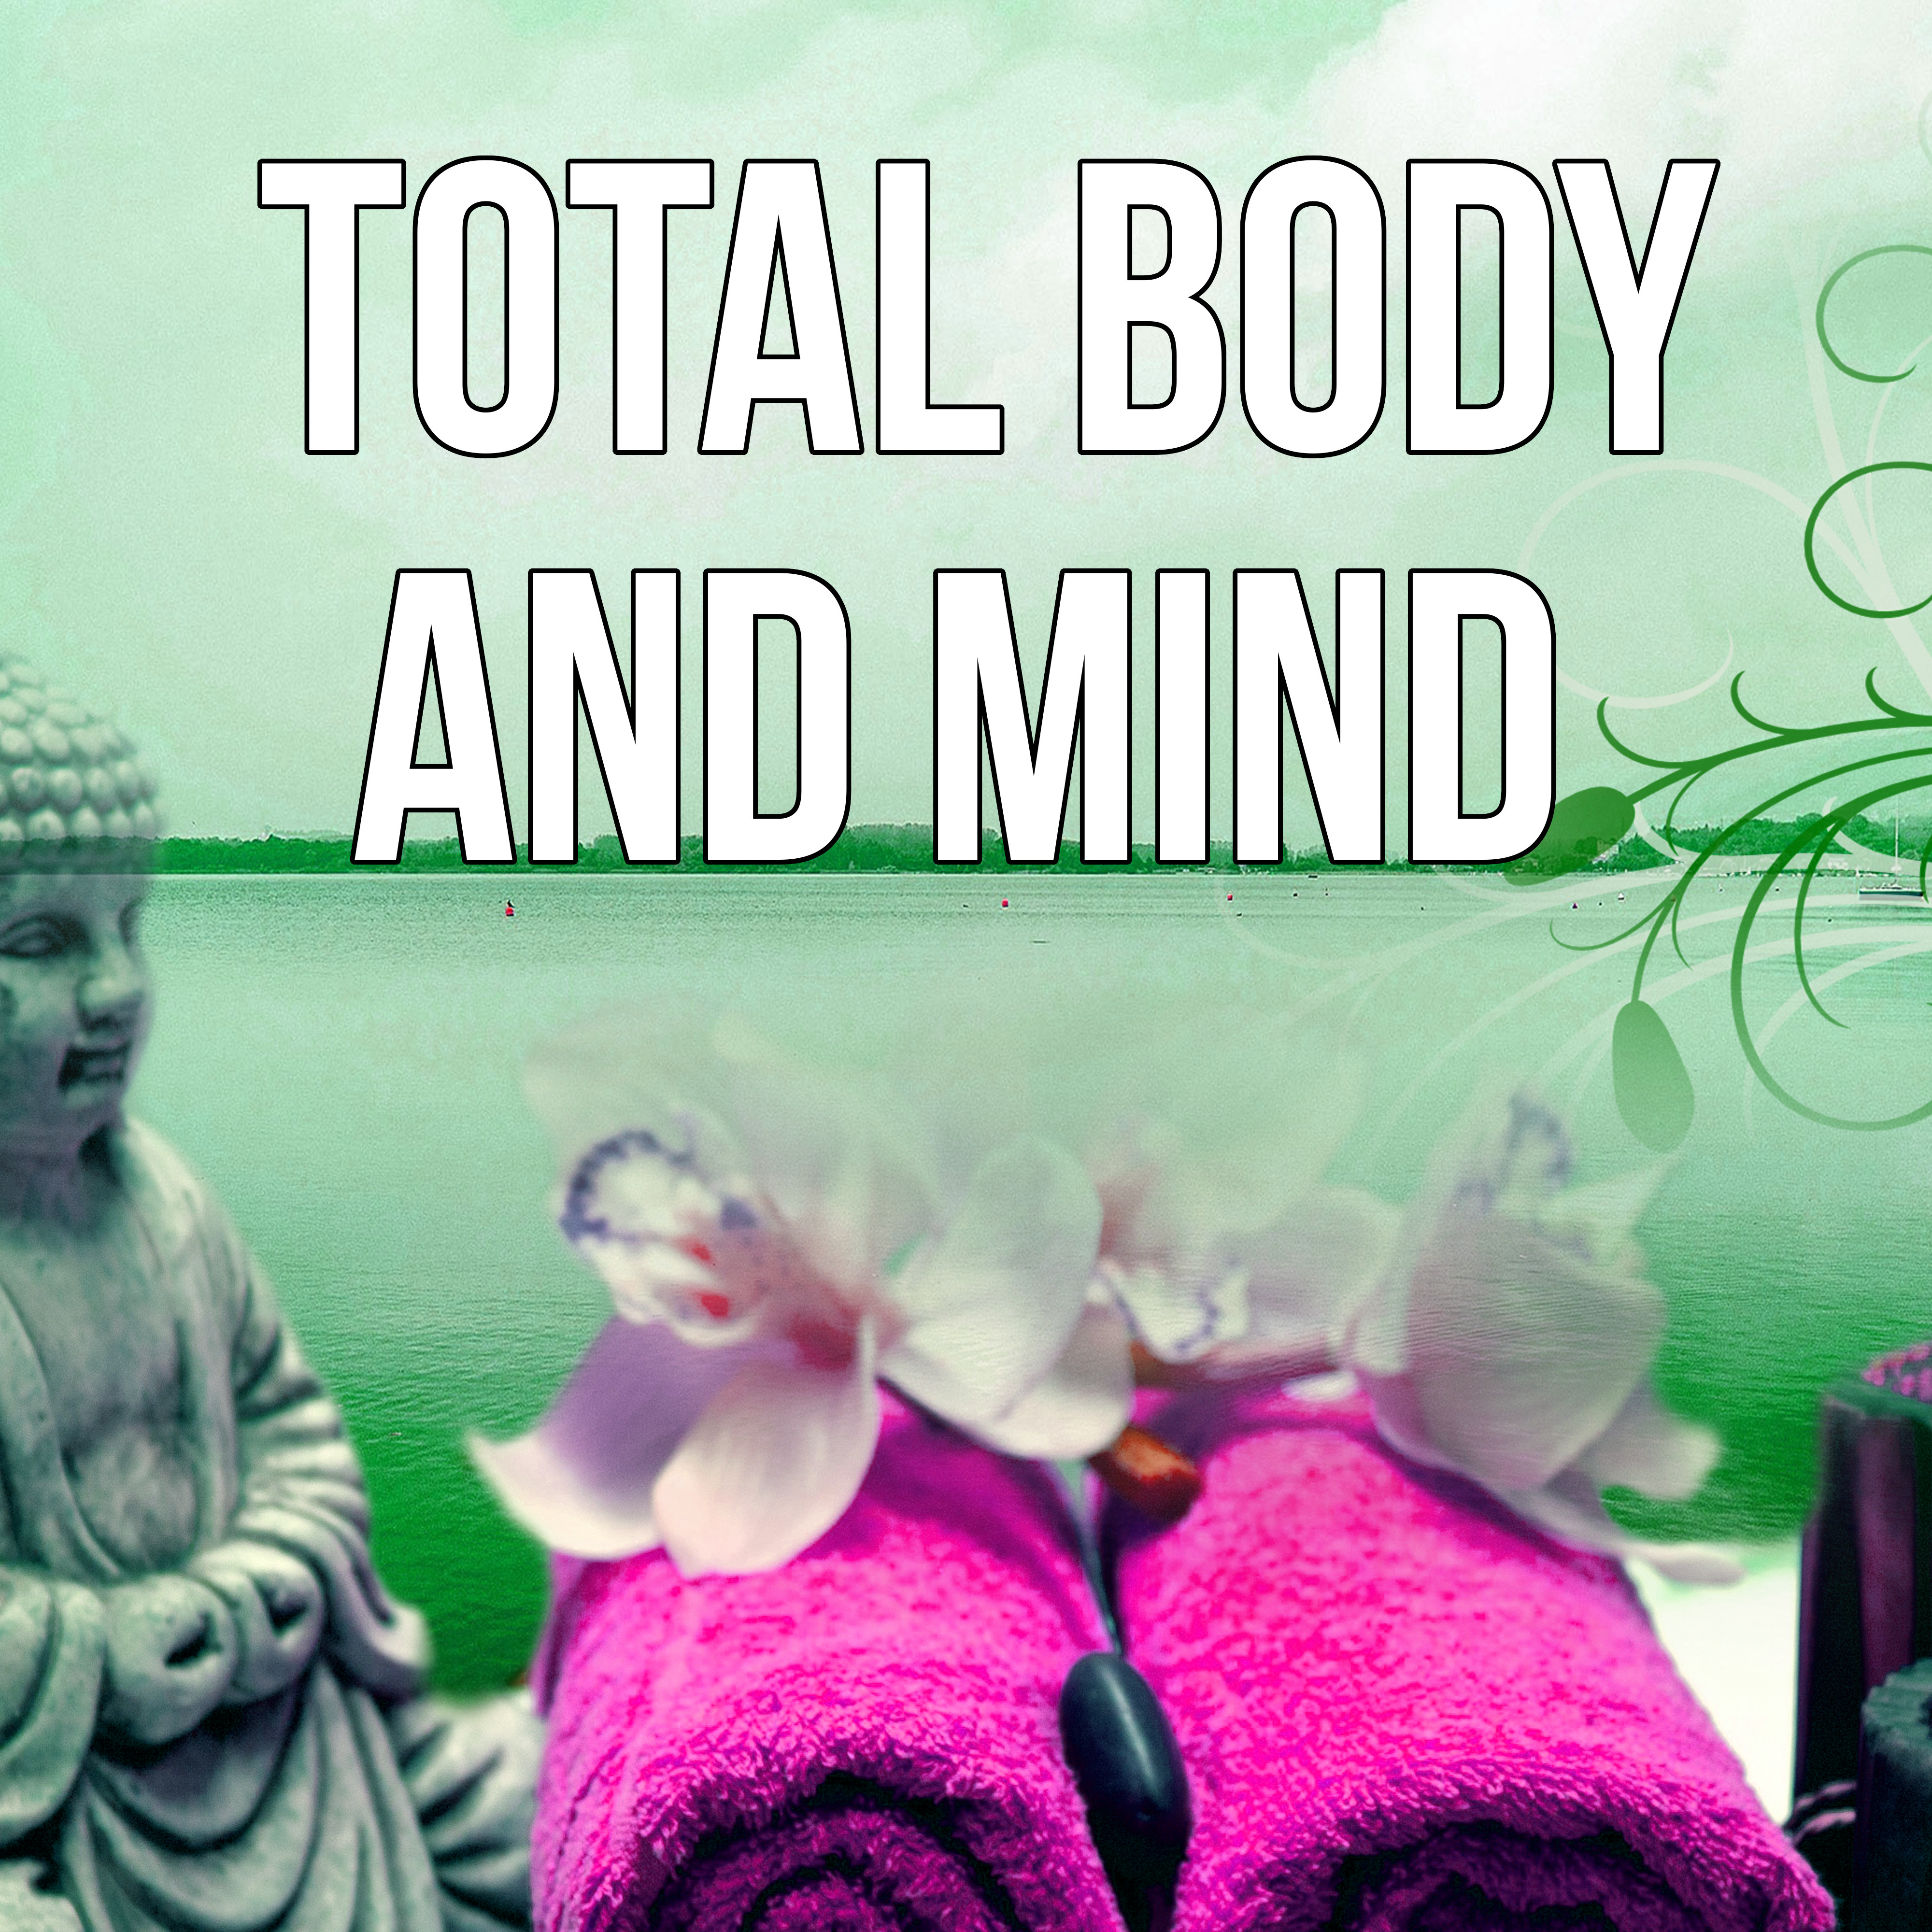 Total Body and Mind - Ultimate Spa Music Collection, Sounds of Nature, Meditation & Relaxation Music, Background Music for Spa